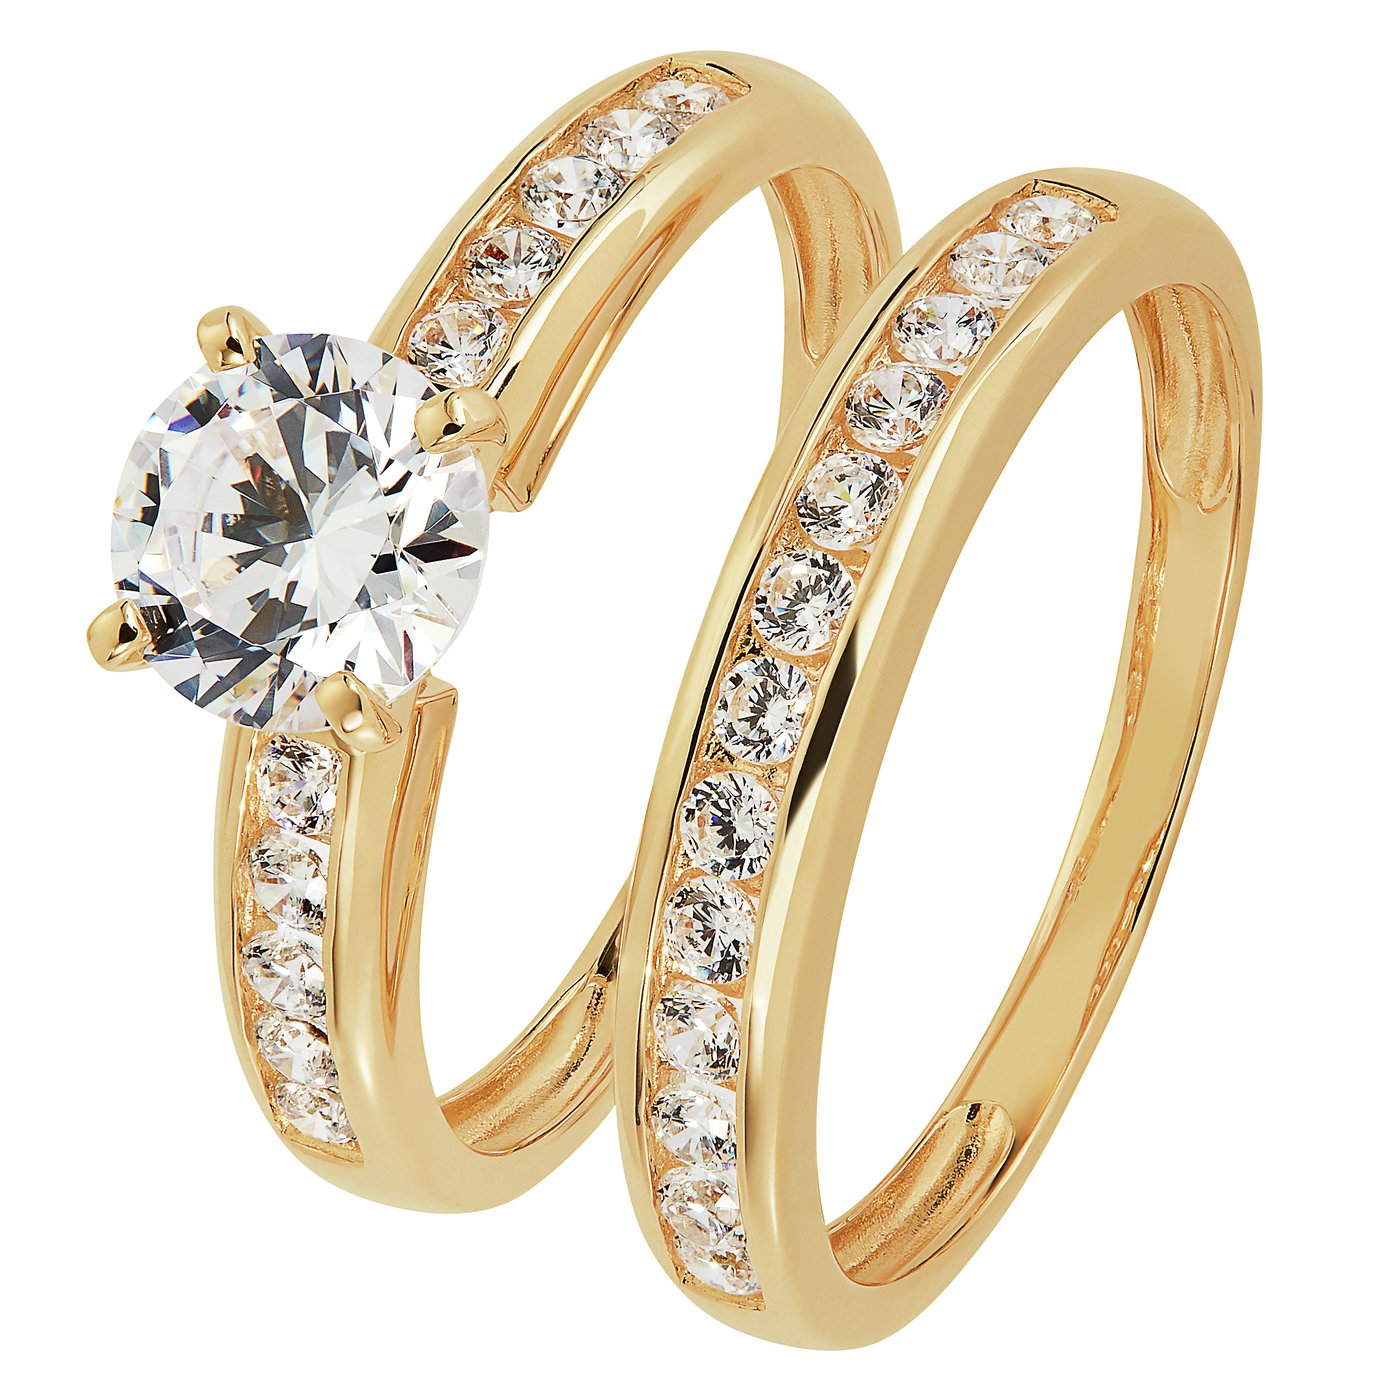 Revere 9ct Gold Cubic Zirconia Solitaire Engagement Ring - J